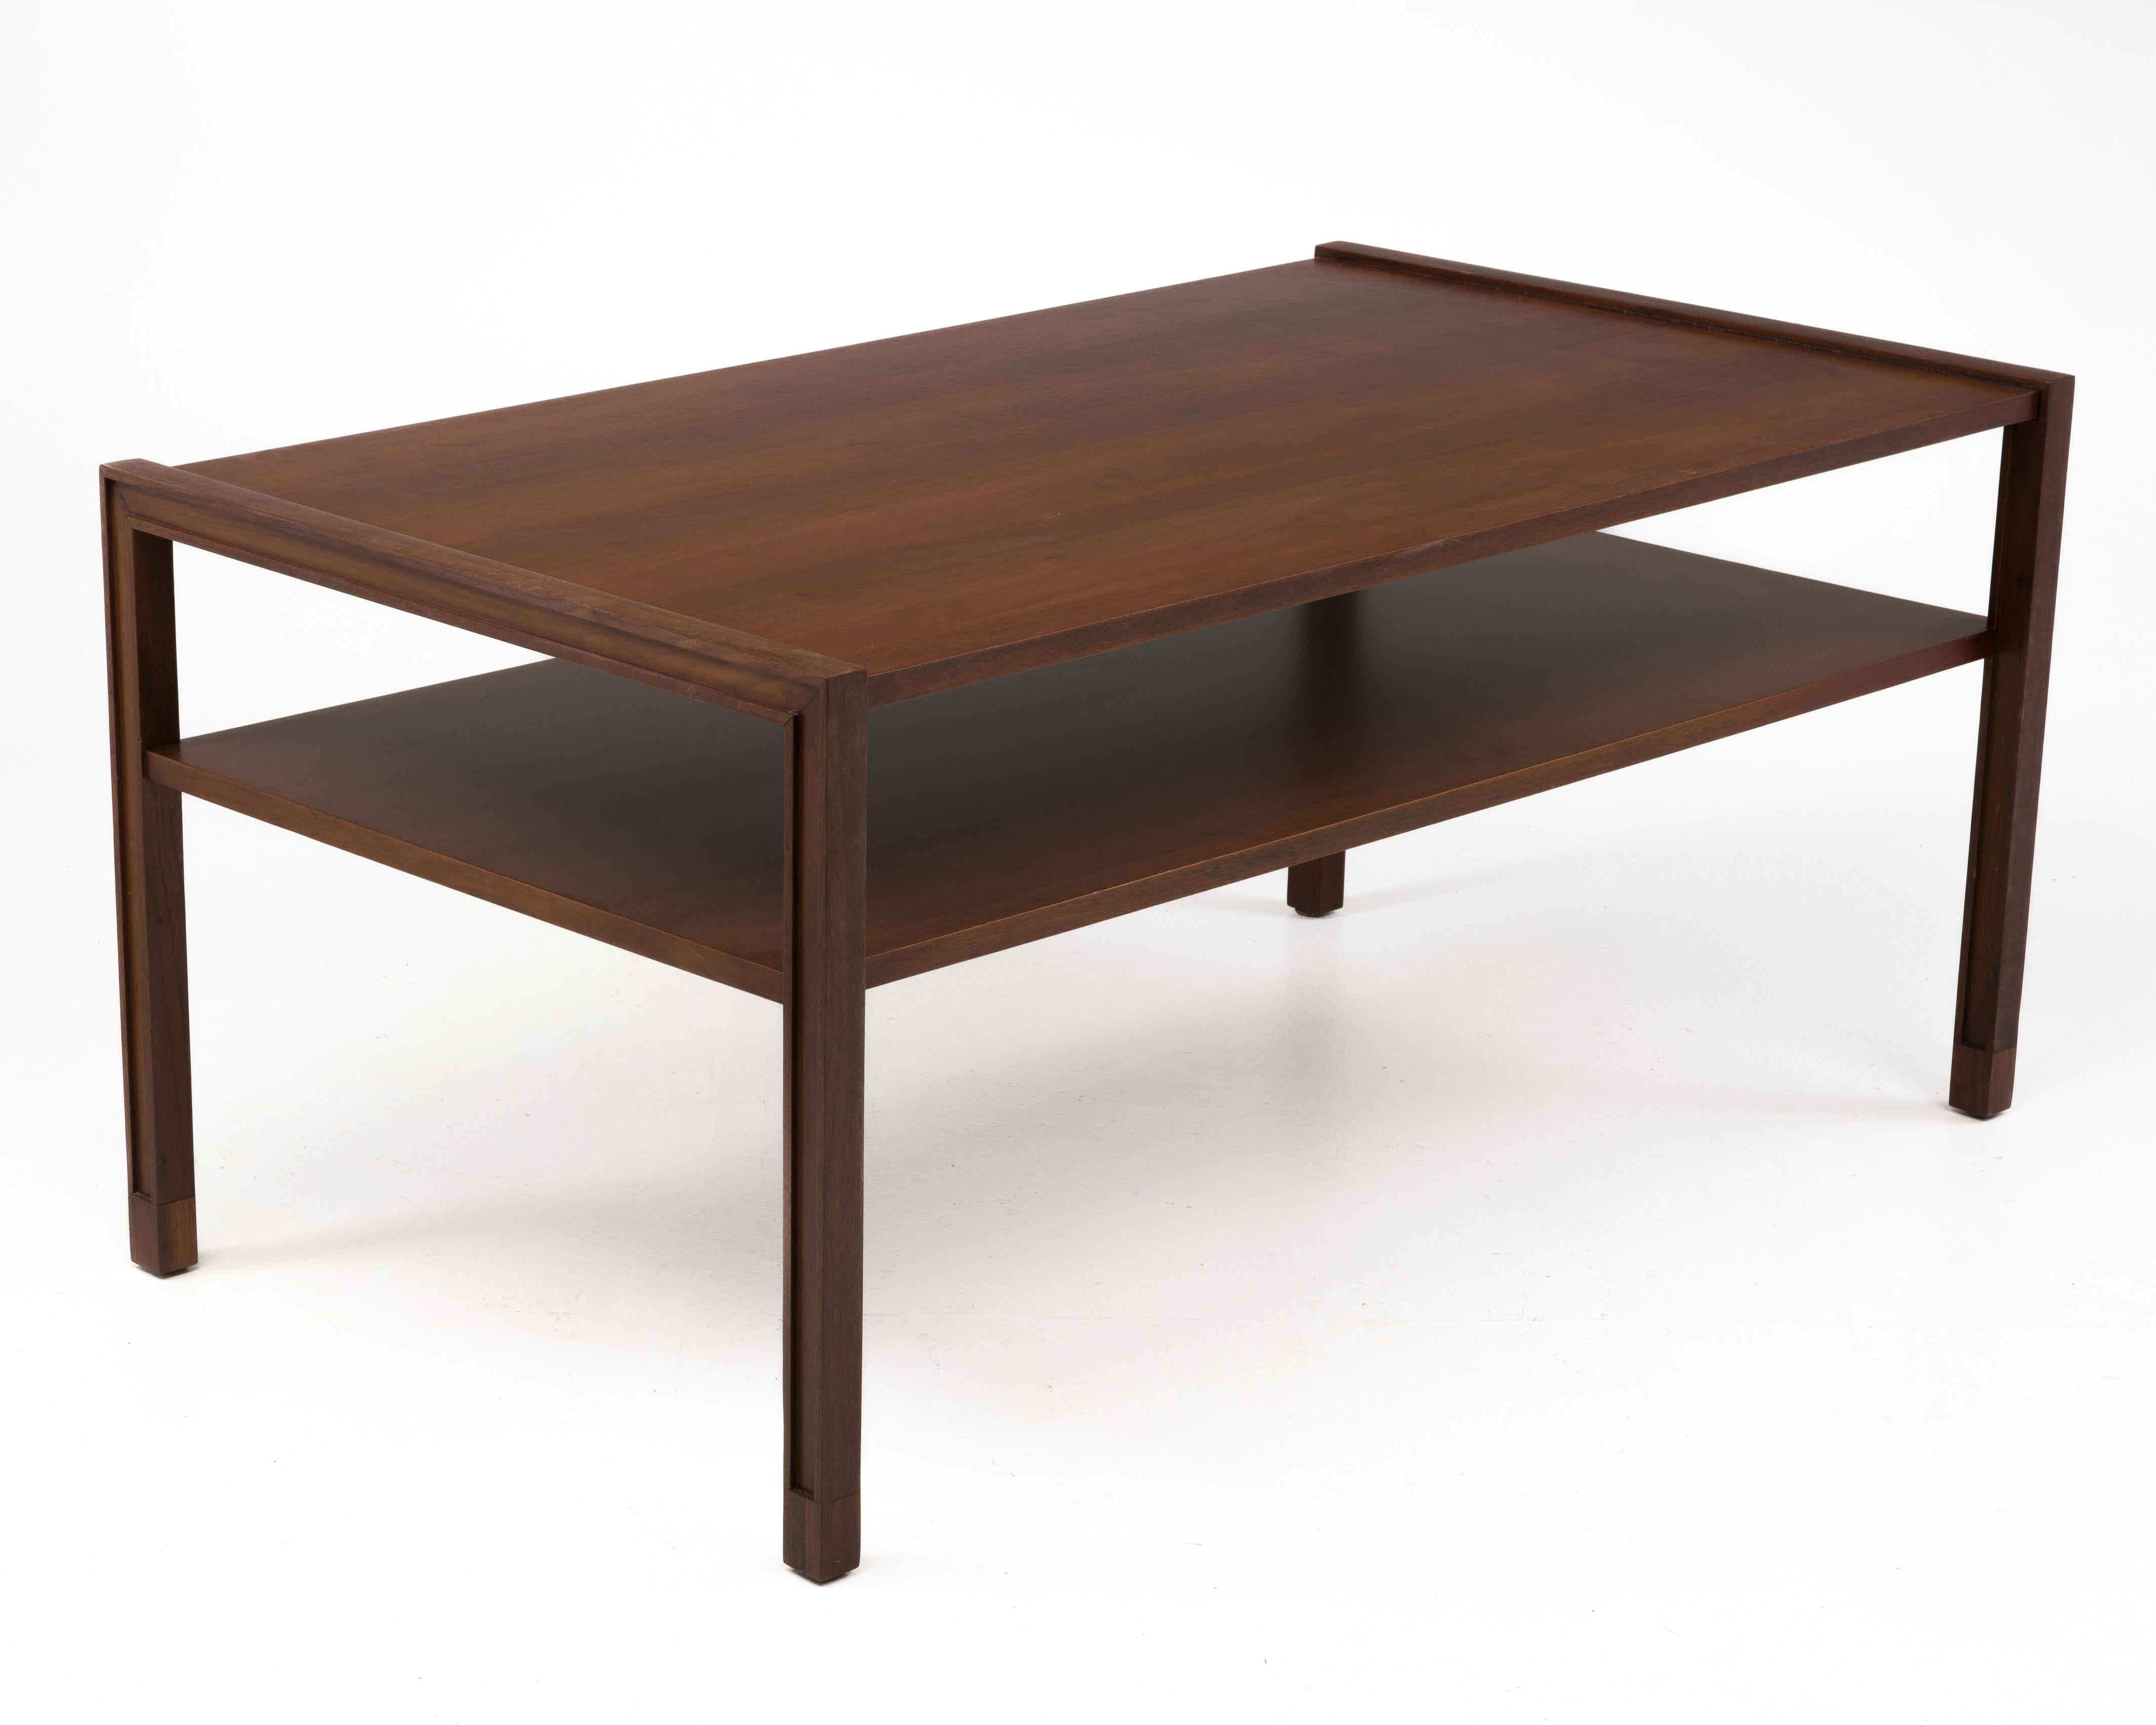 Coffee or cocktail Table designed by Edward Wormley for Dunbar. The opening between the top and lower shelf is 6.1